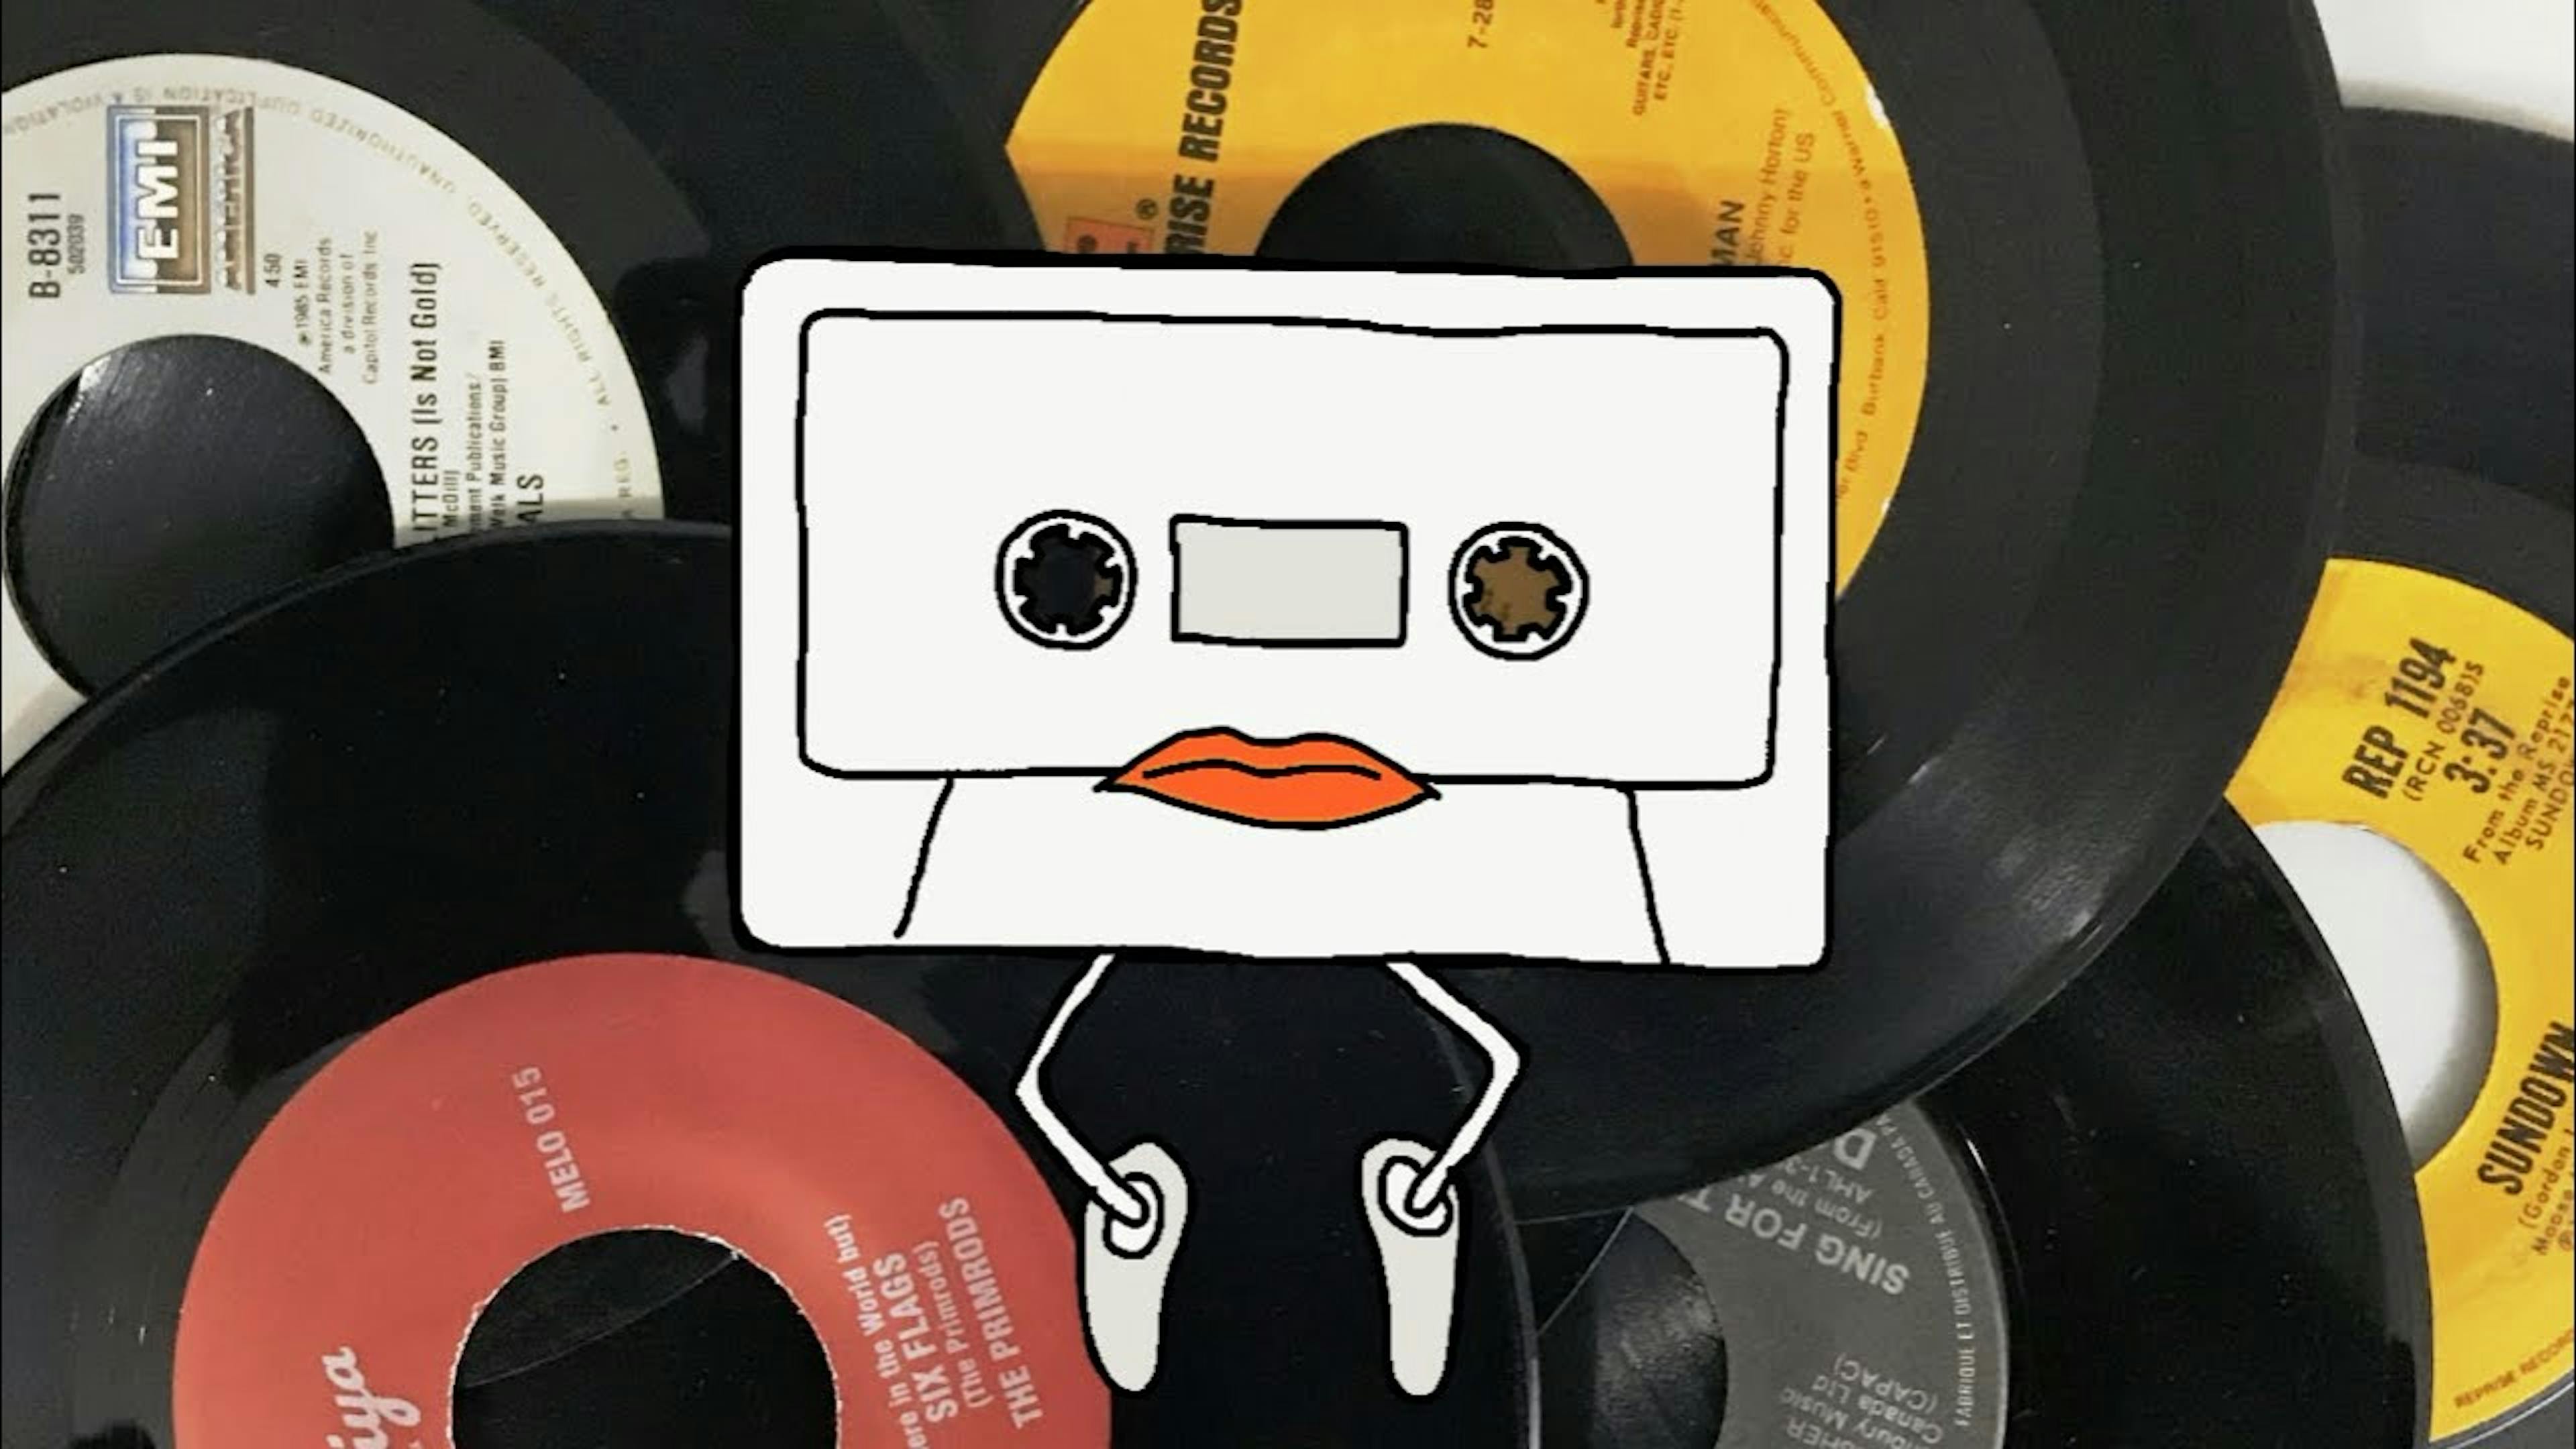 Still from Troy Kokol's animated music video for his song "Like a Record" — a hand-drawn tape cassette with mouth and legs over a scattered stack of 7" records